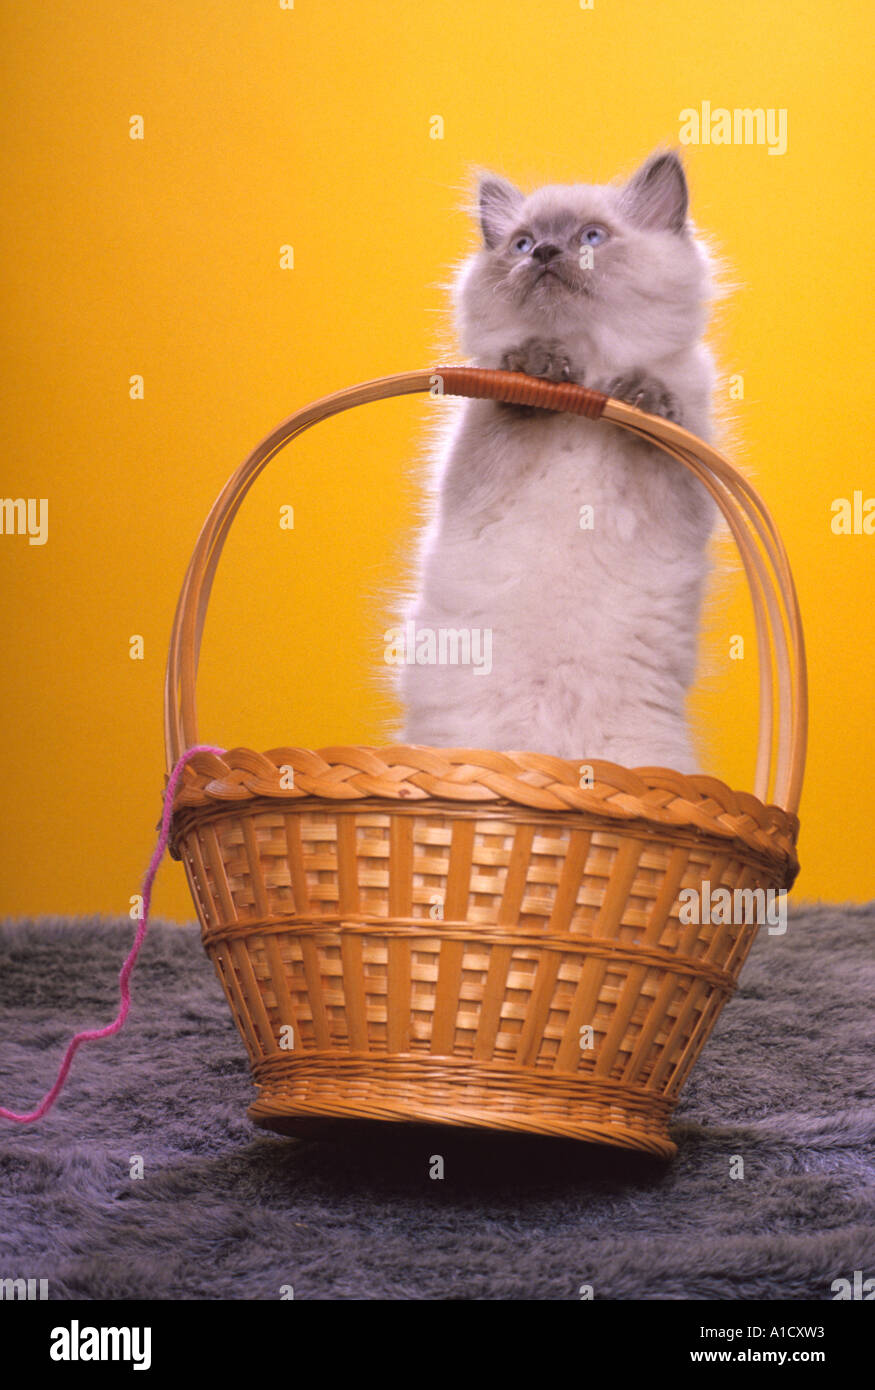 Bluepoint Himalayan kitten standing in straw basket which is falling over PR 204 Stock Photo